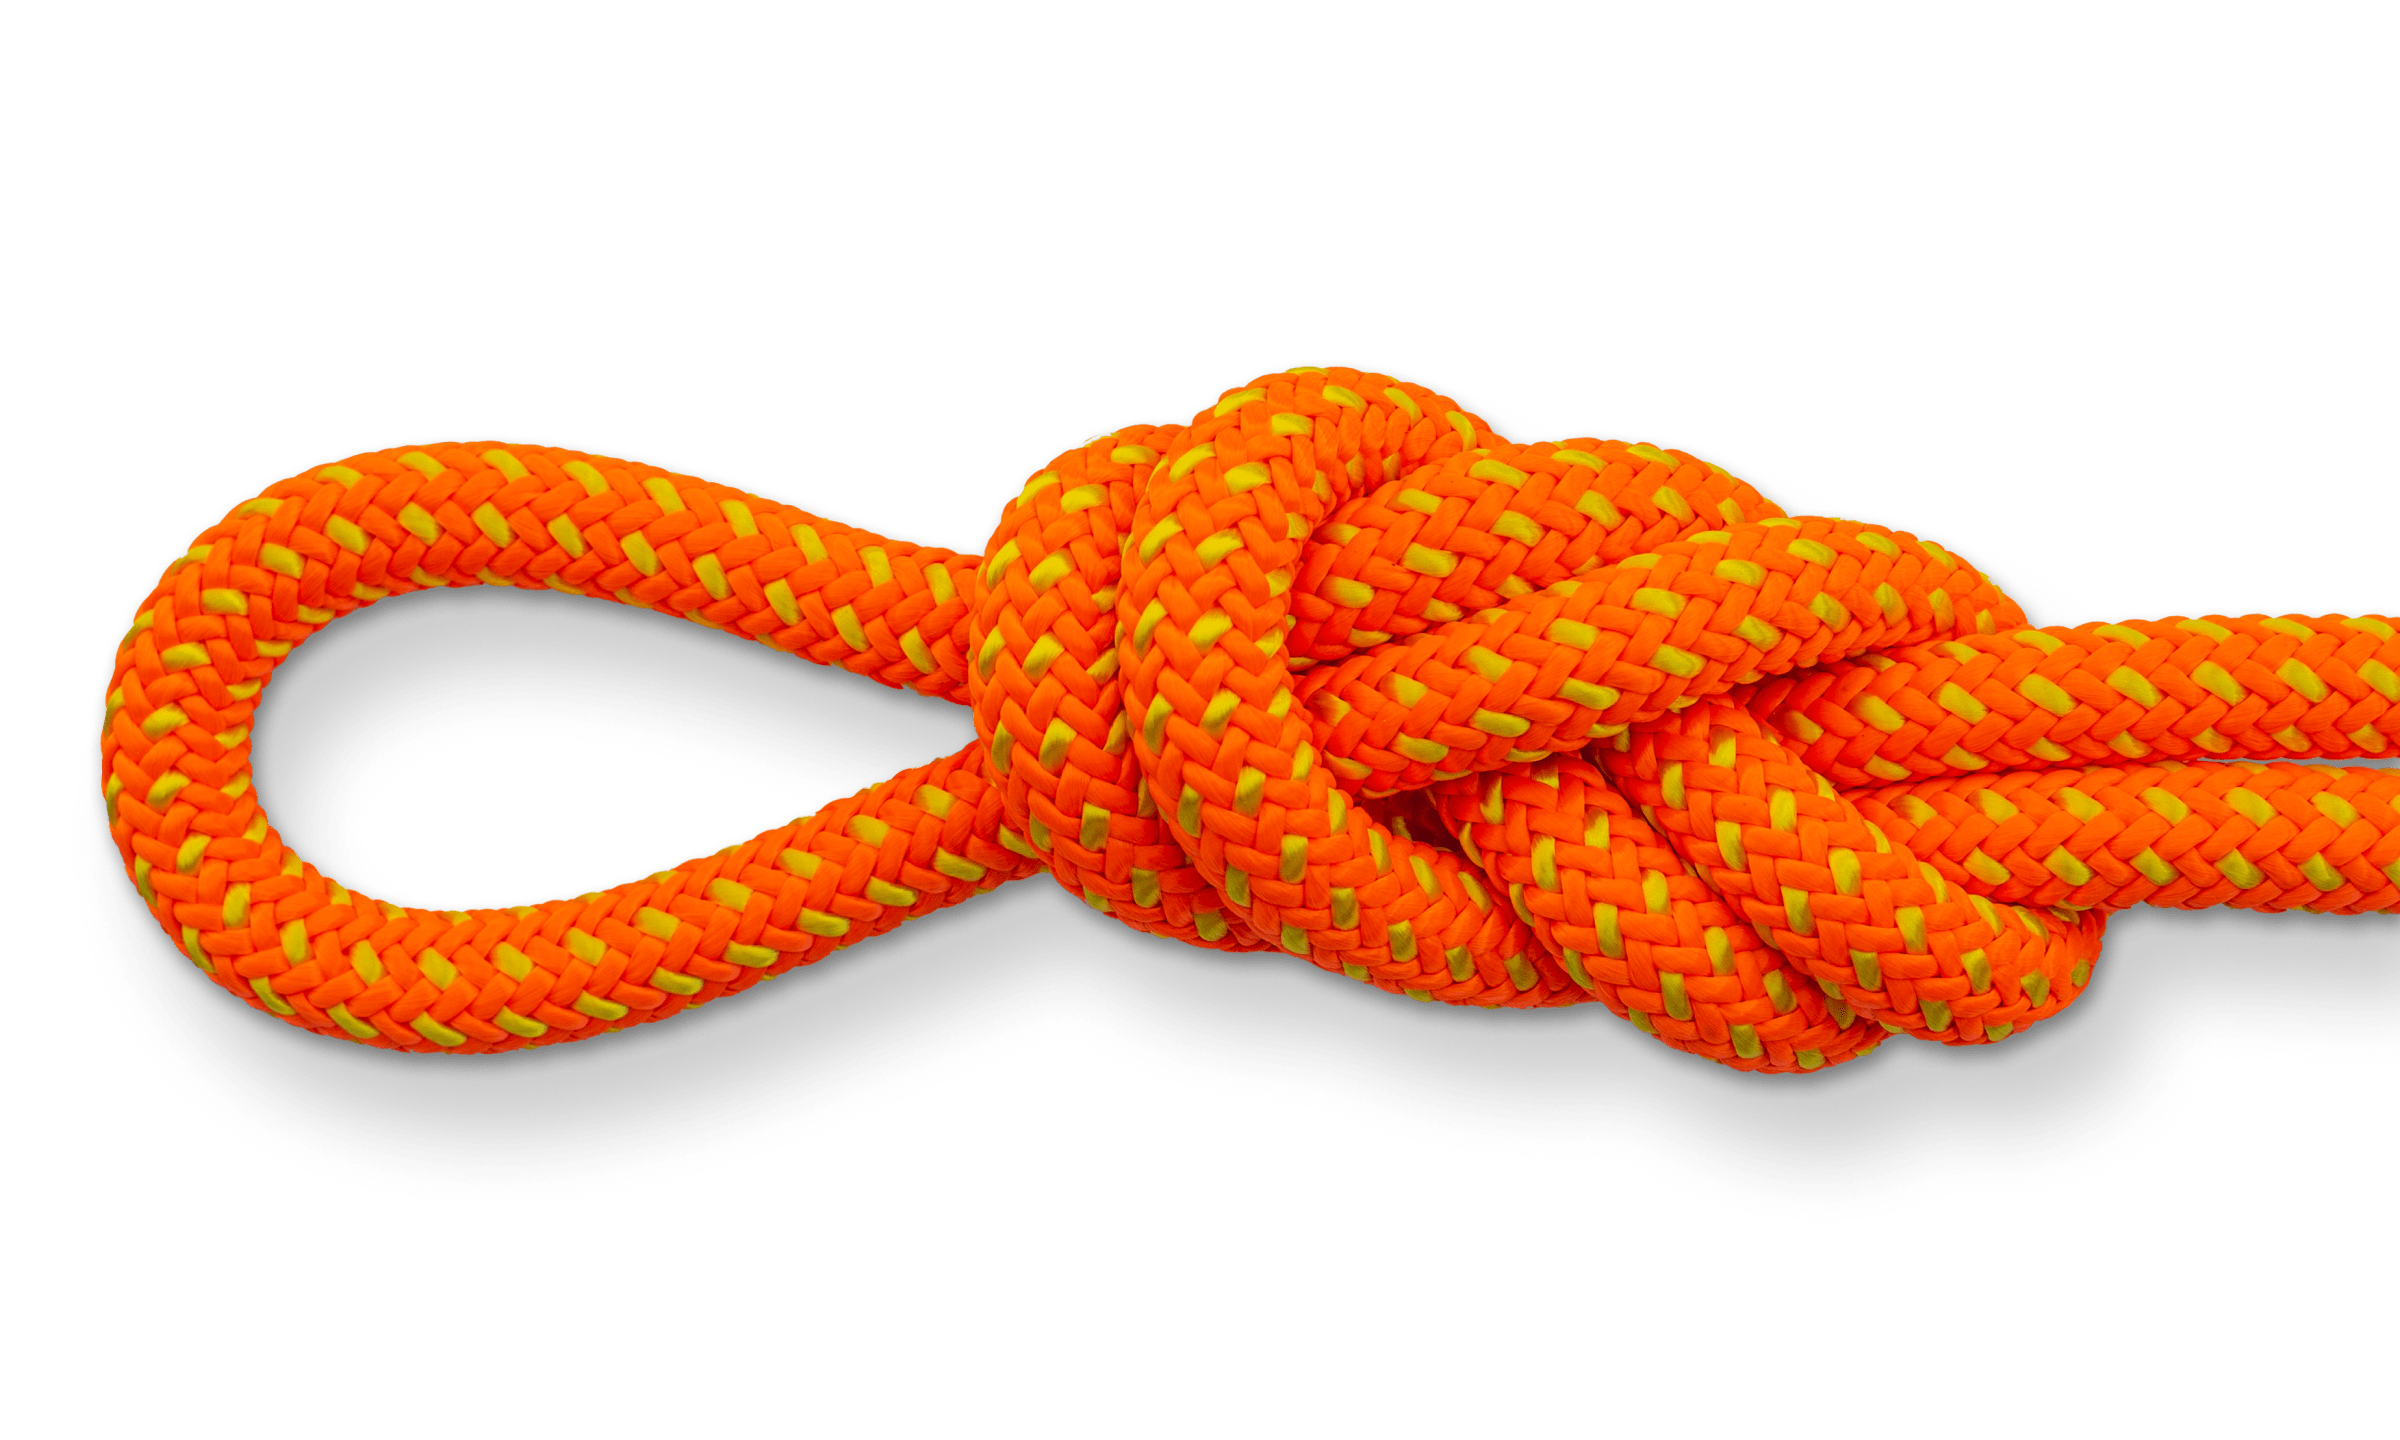 tachyon climbing rope orange and yellow double figure eight knot